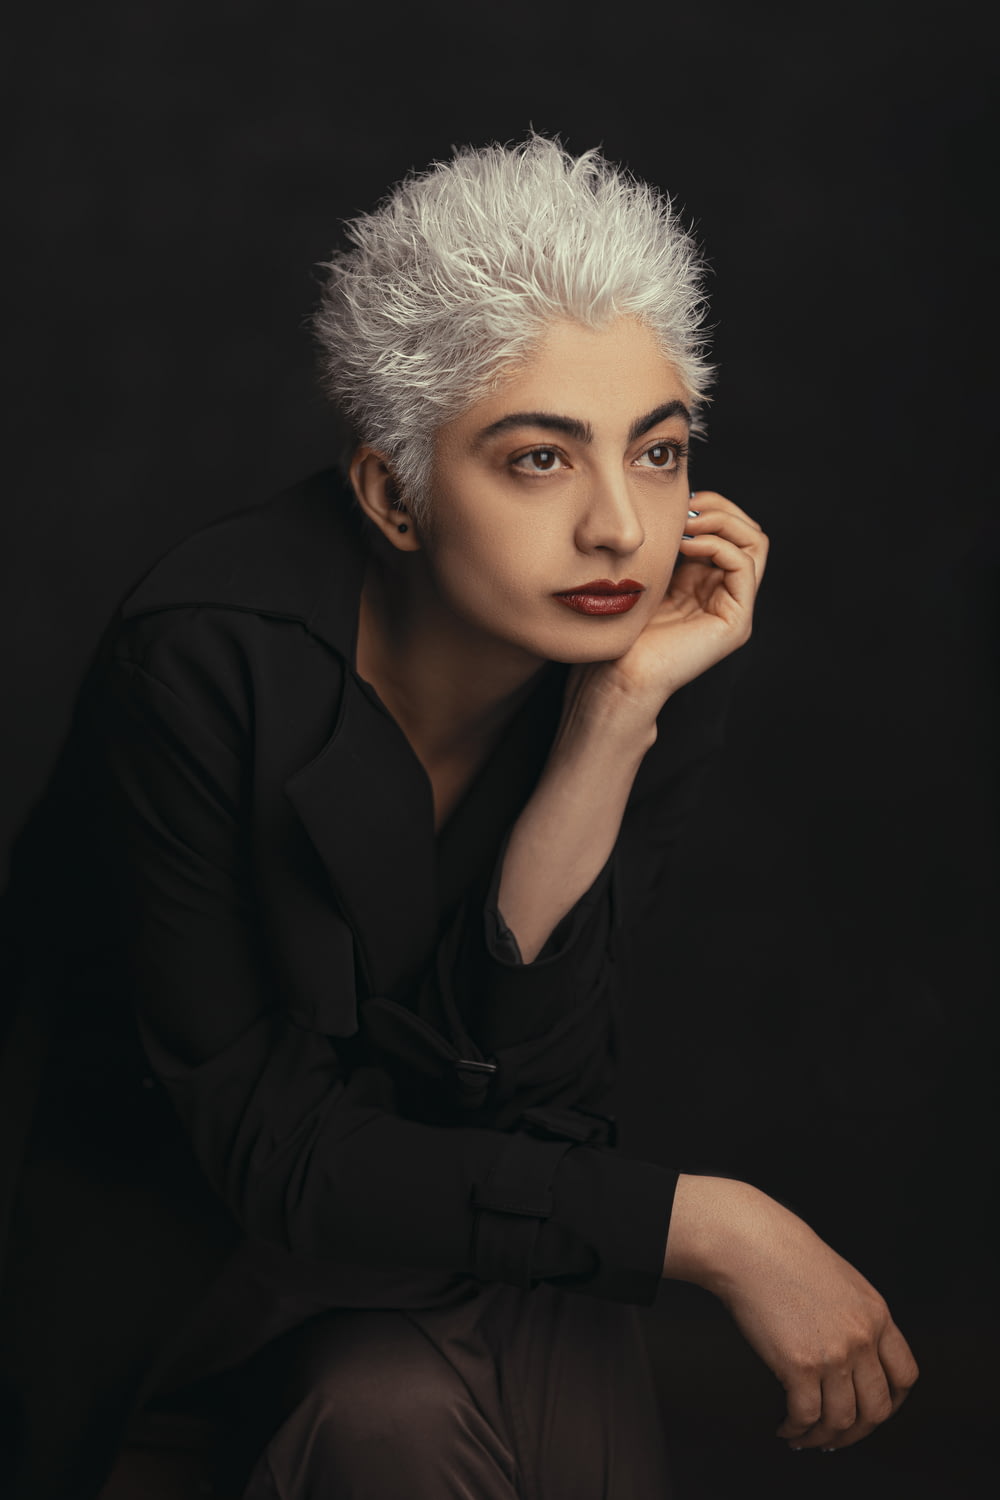 a woman with white hair and a black shirt